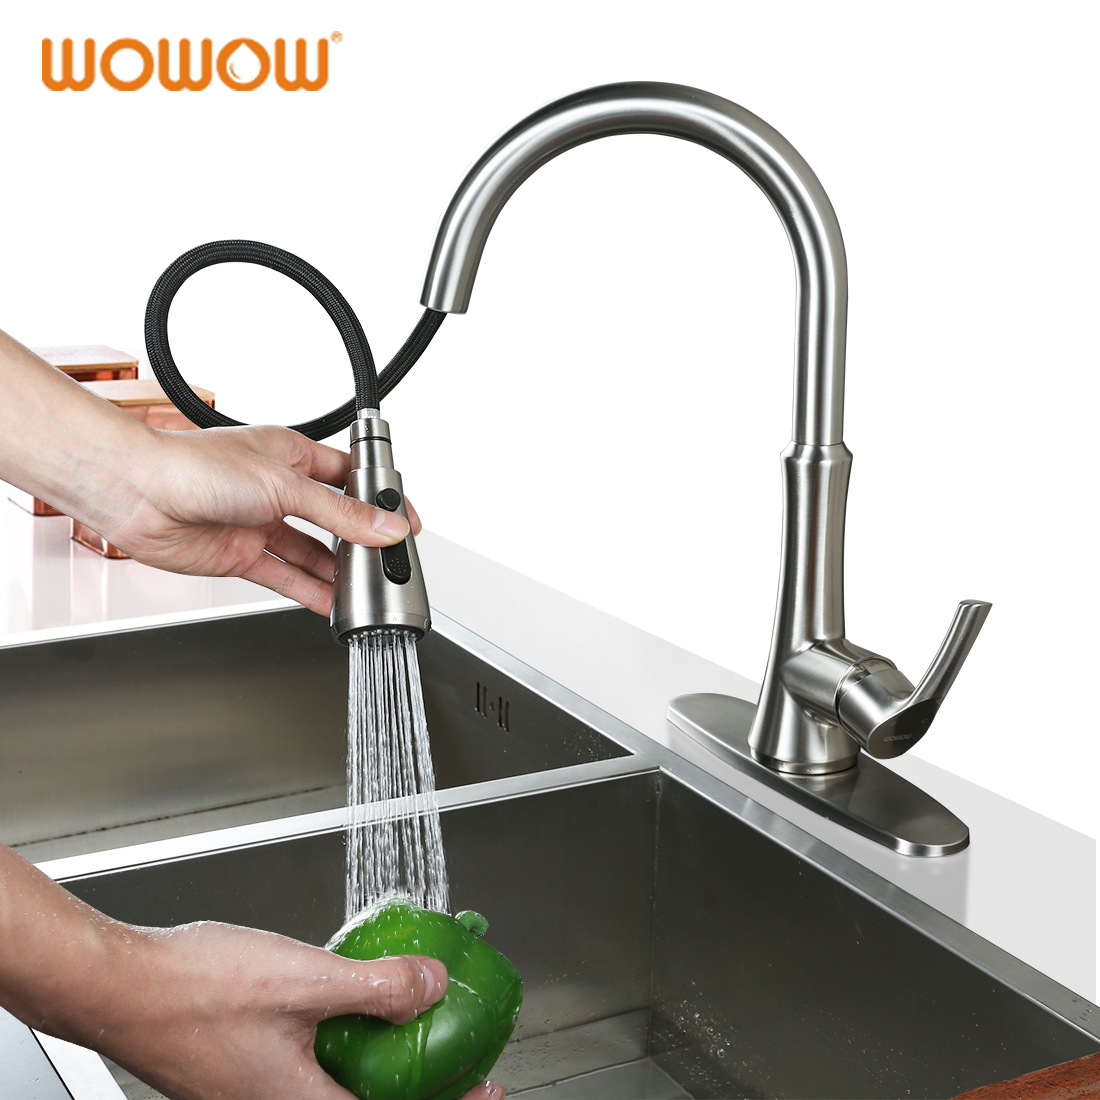 Precautions For Purchasing Kitchen Faucets